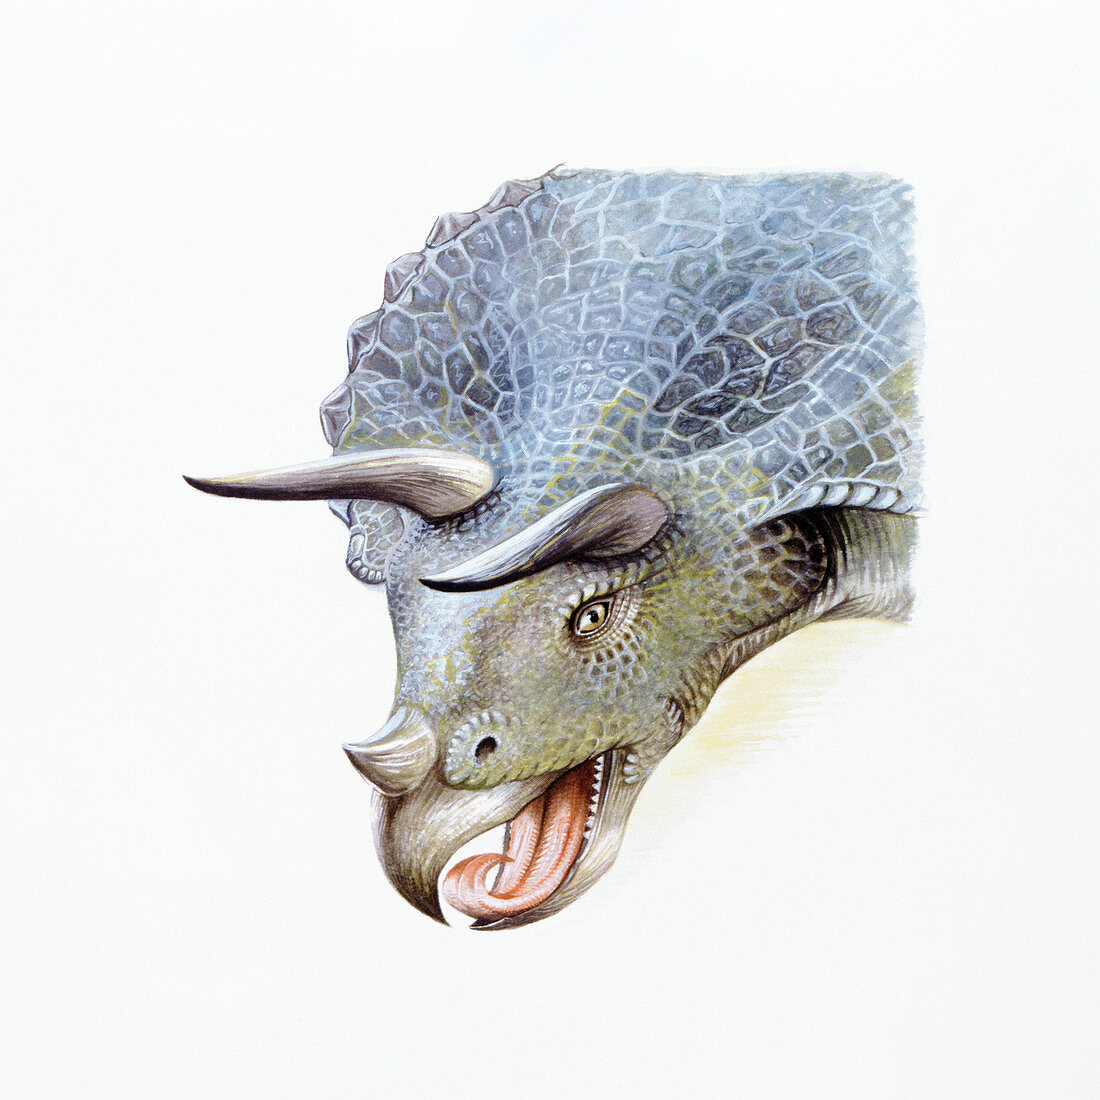 Illustration of Triceratops,close up